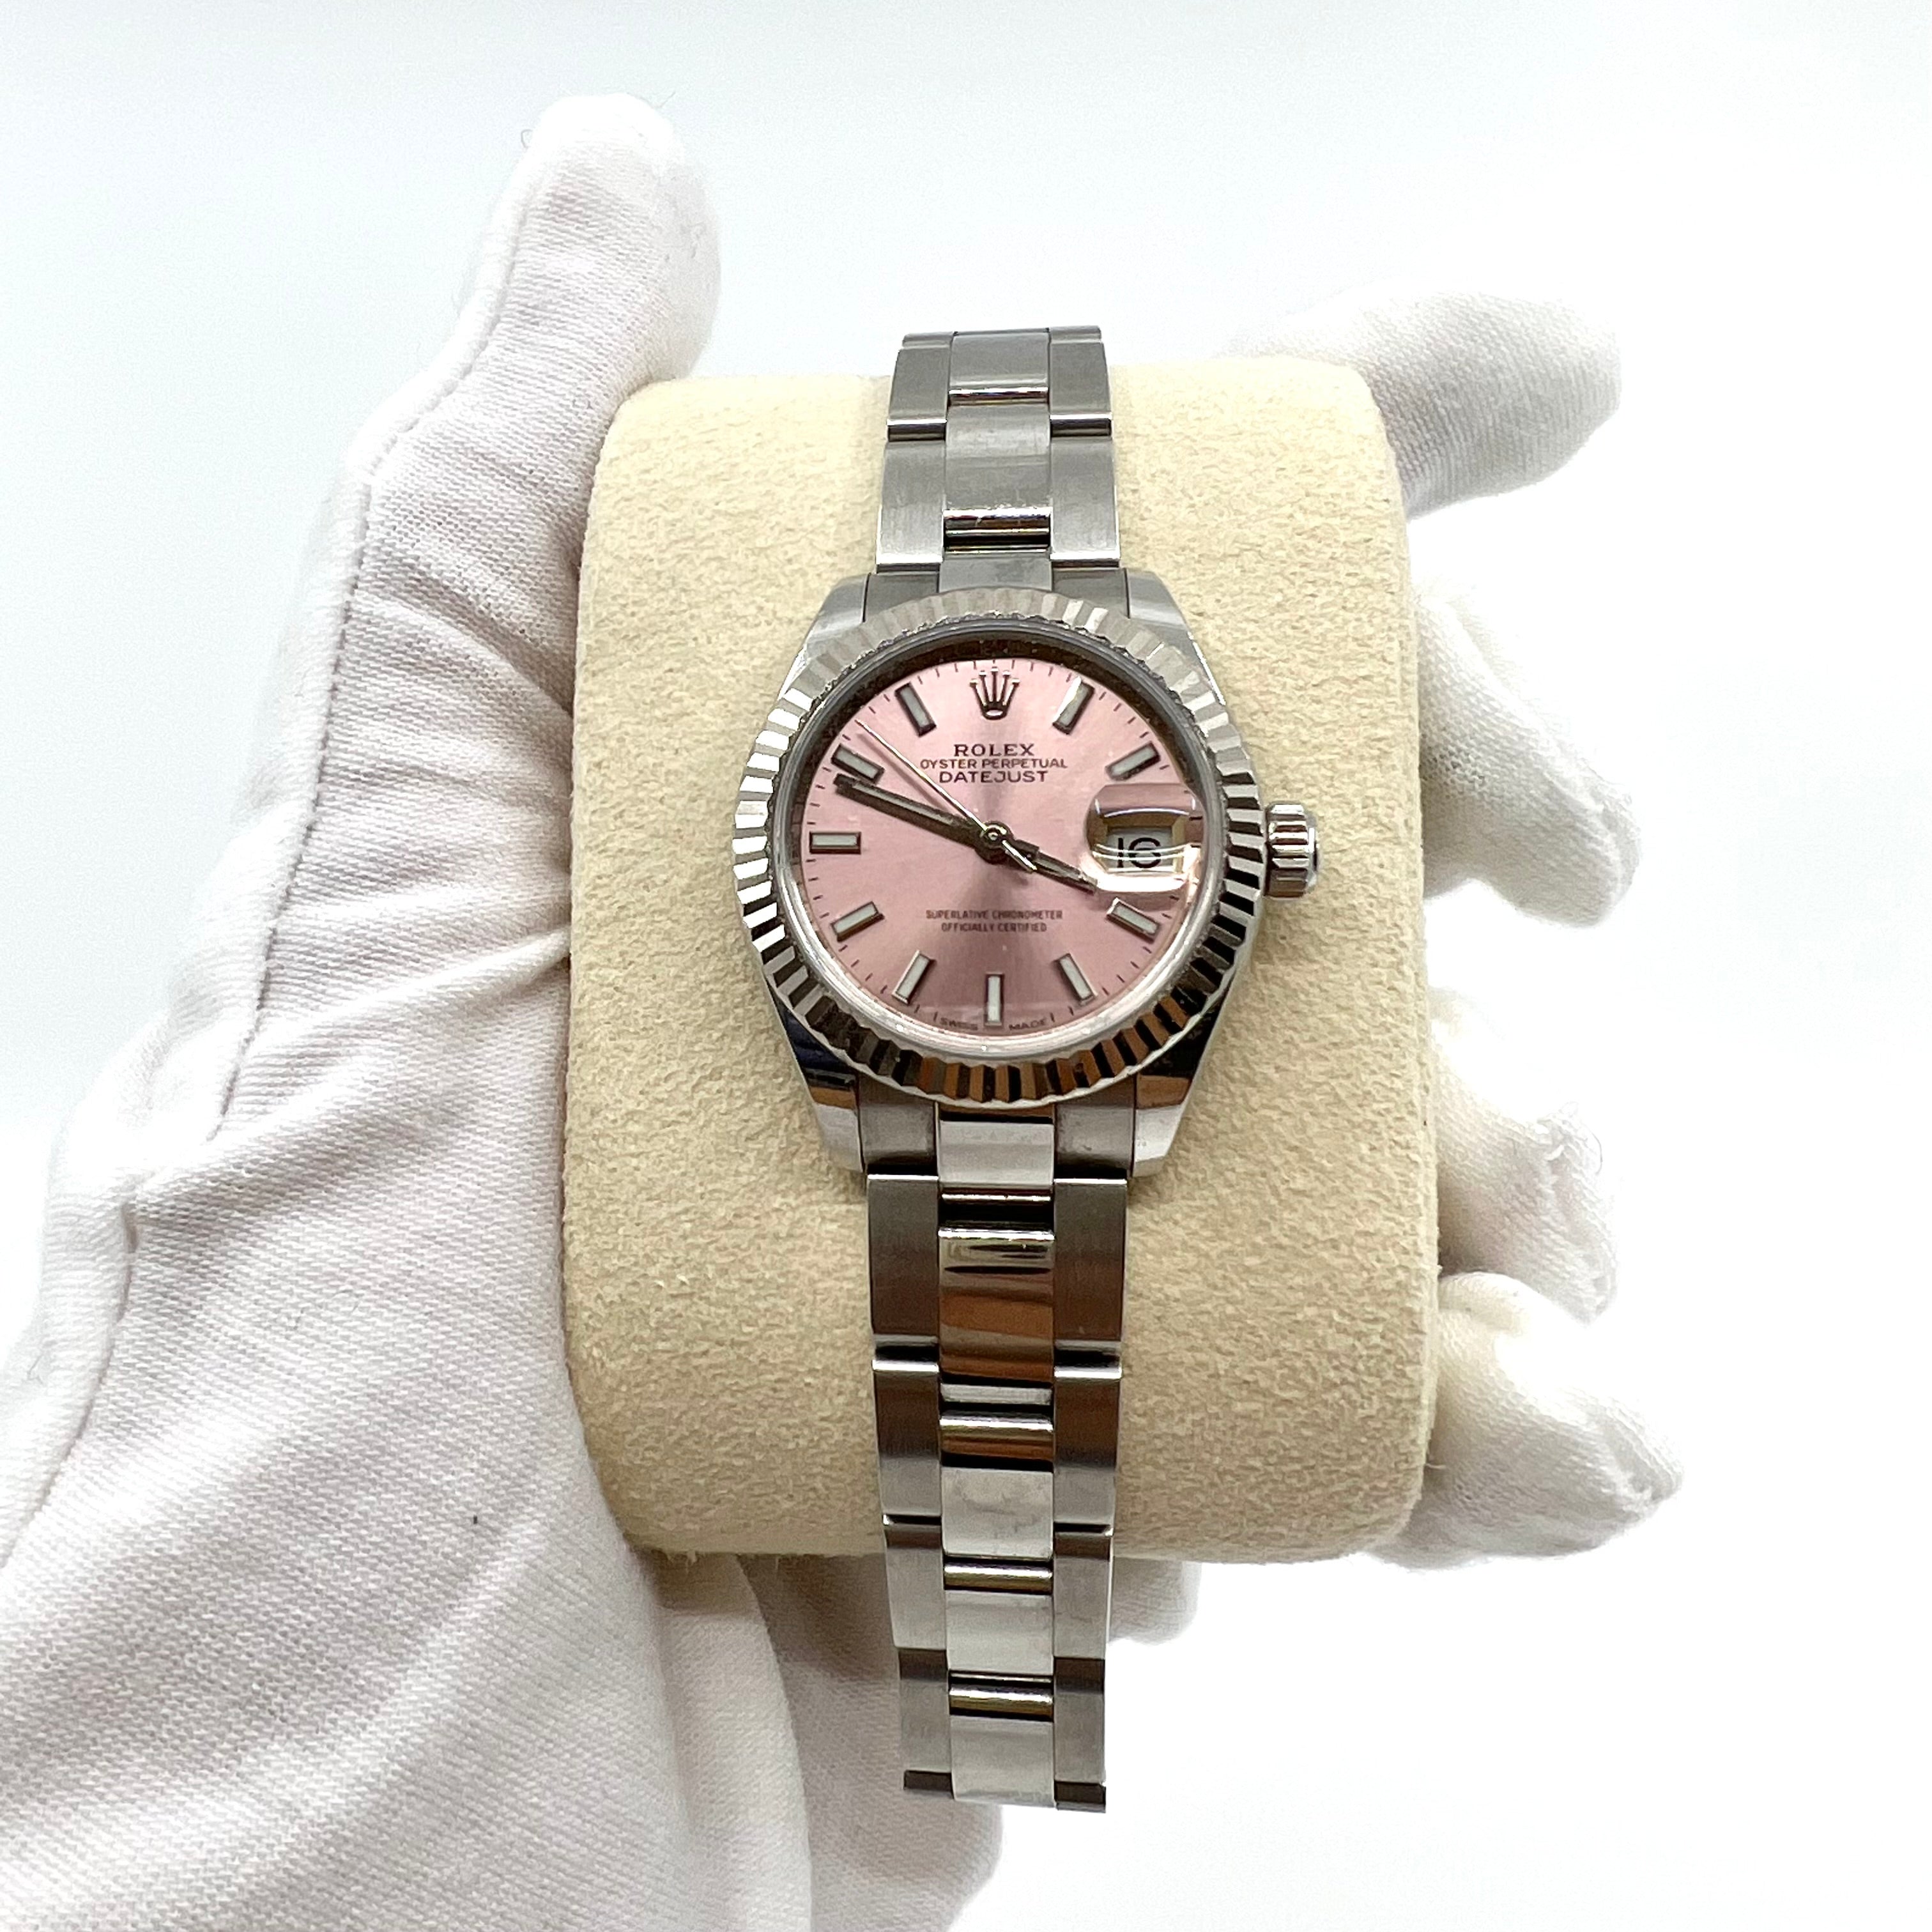 ROLEX Lady-Datejust 28mm Stainless Steel Fluted Bezel Pink Face Oyster